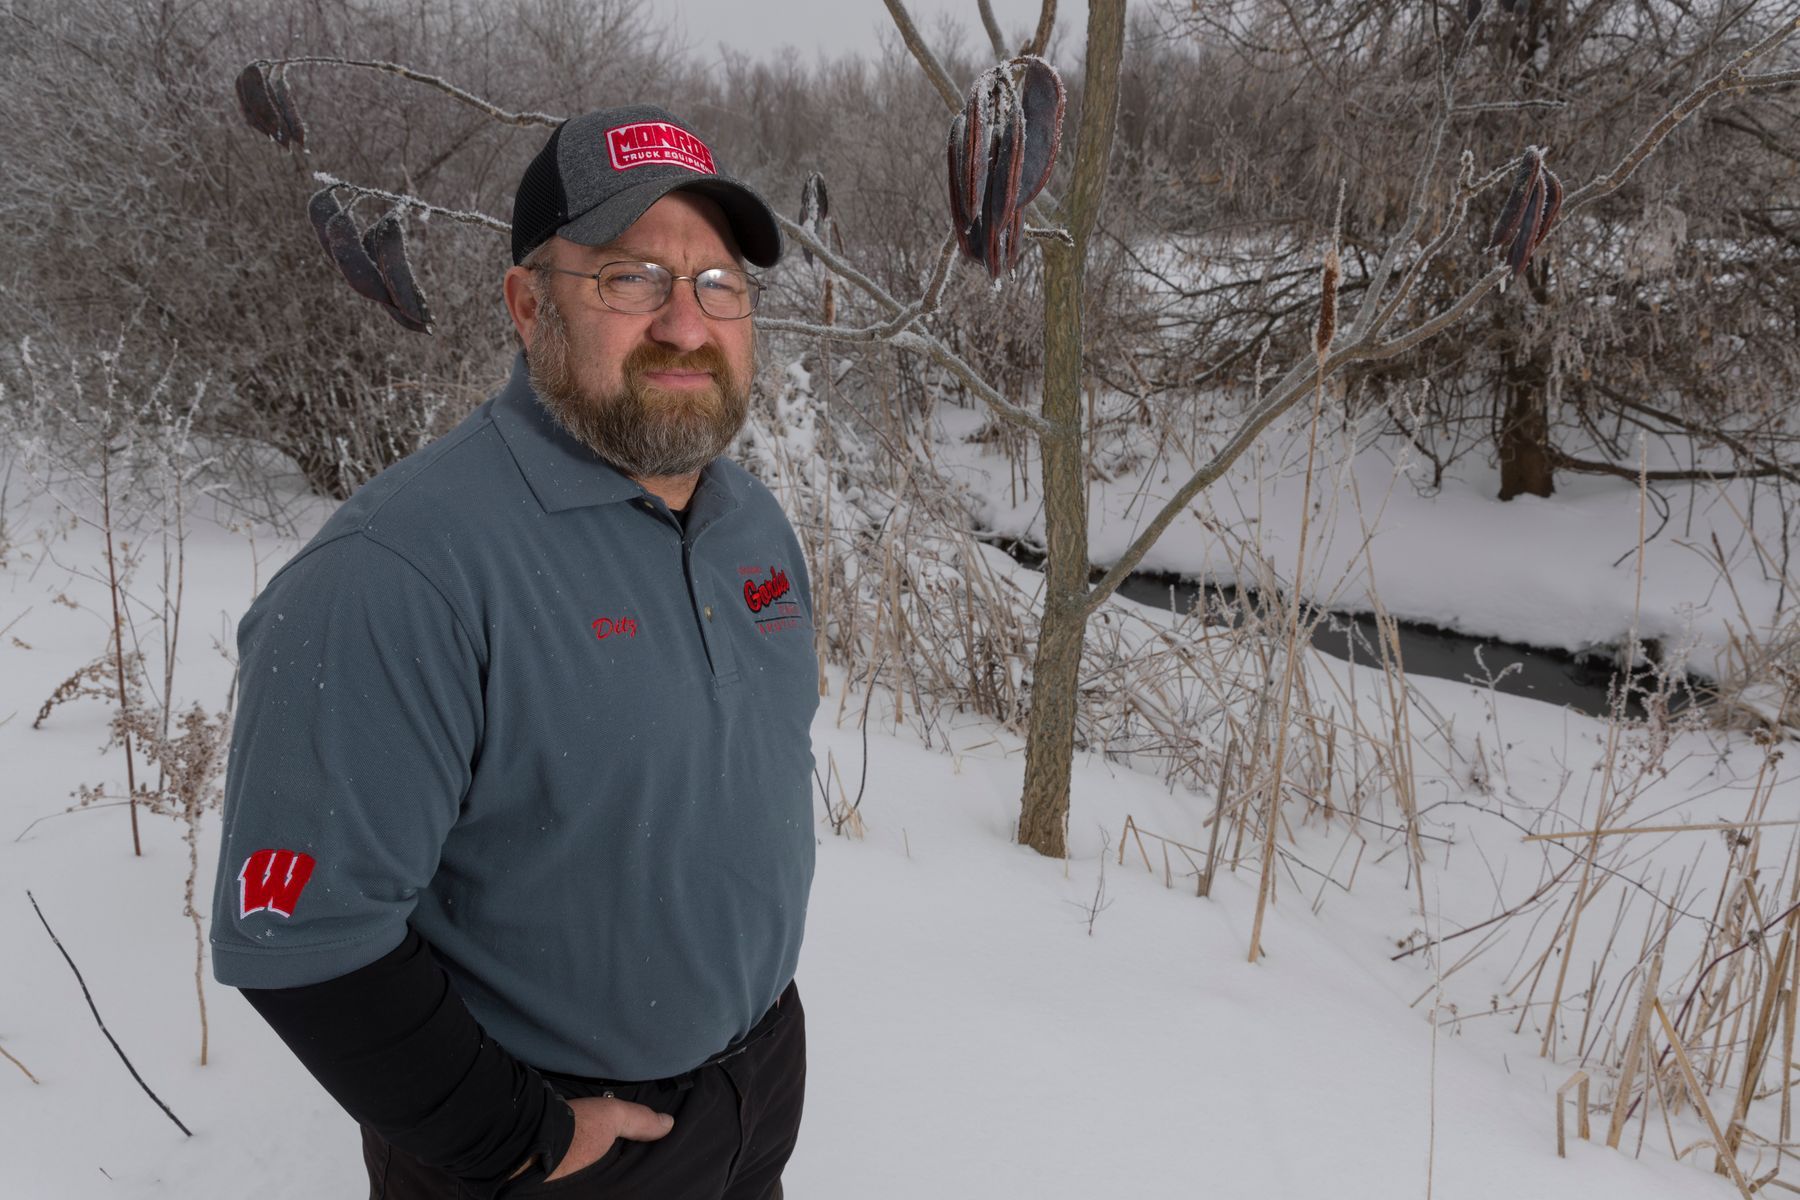 Jeff Ditzenberger has become a lifeline for other farmers who've contemplated suicide. Image by Mark Hoffman/Milwaukee Journal Sentinel. USA, 2019.